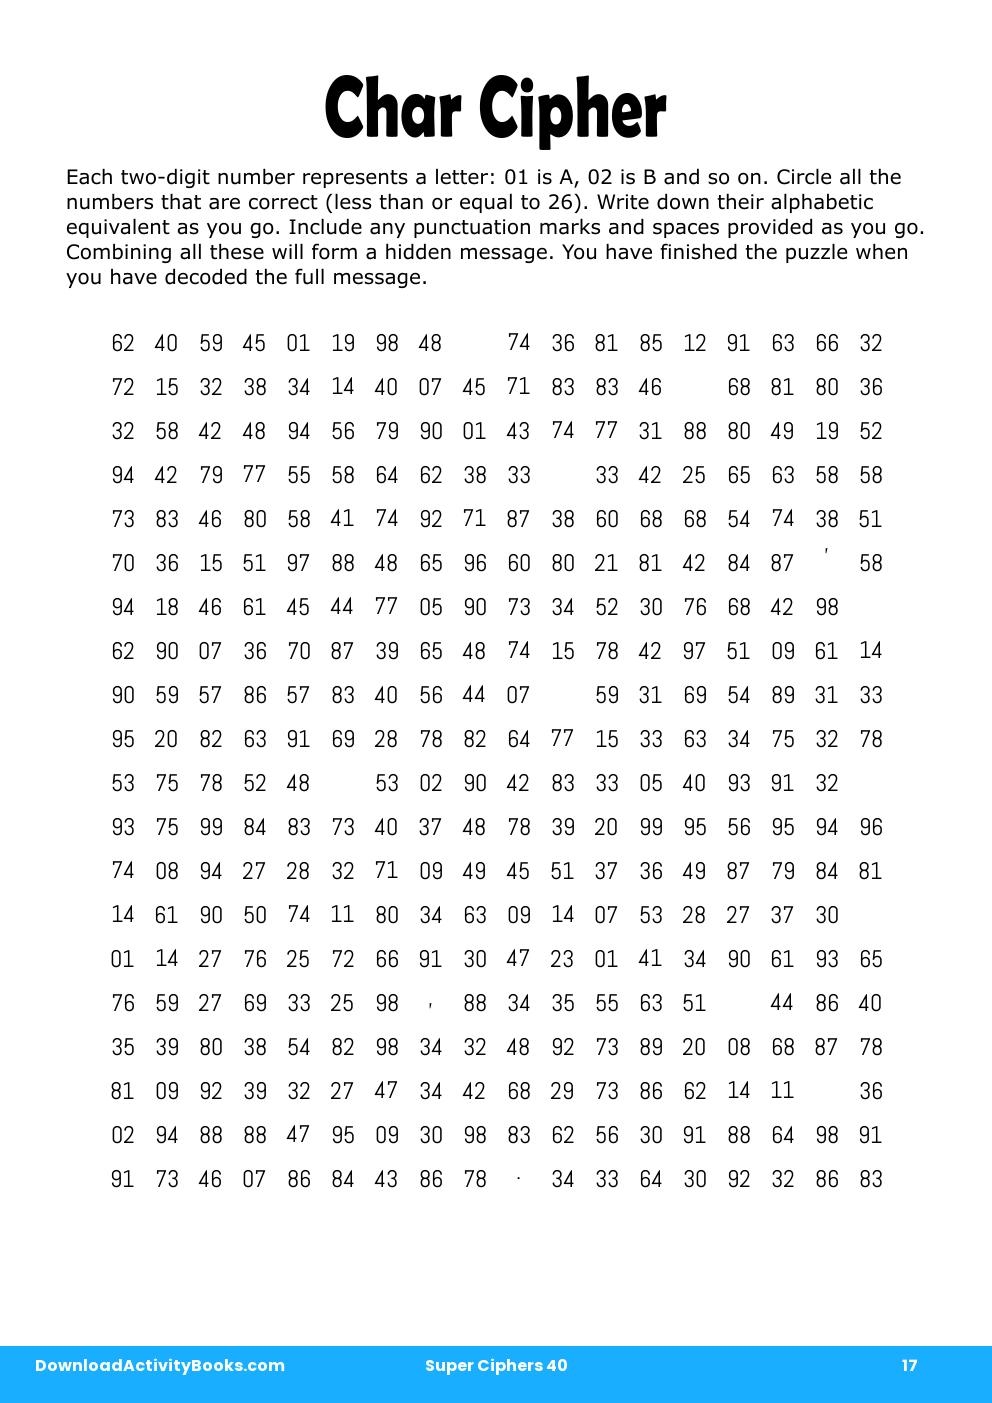 Char Cipher in Super Ciphers 40